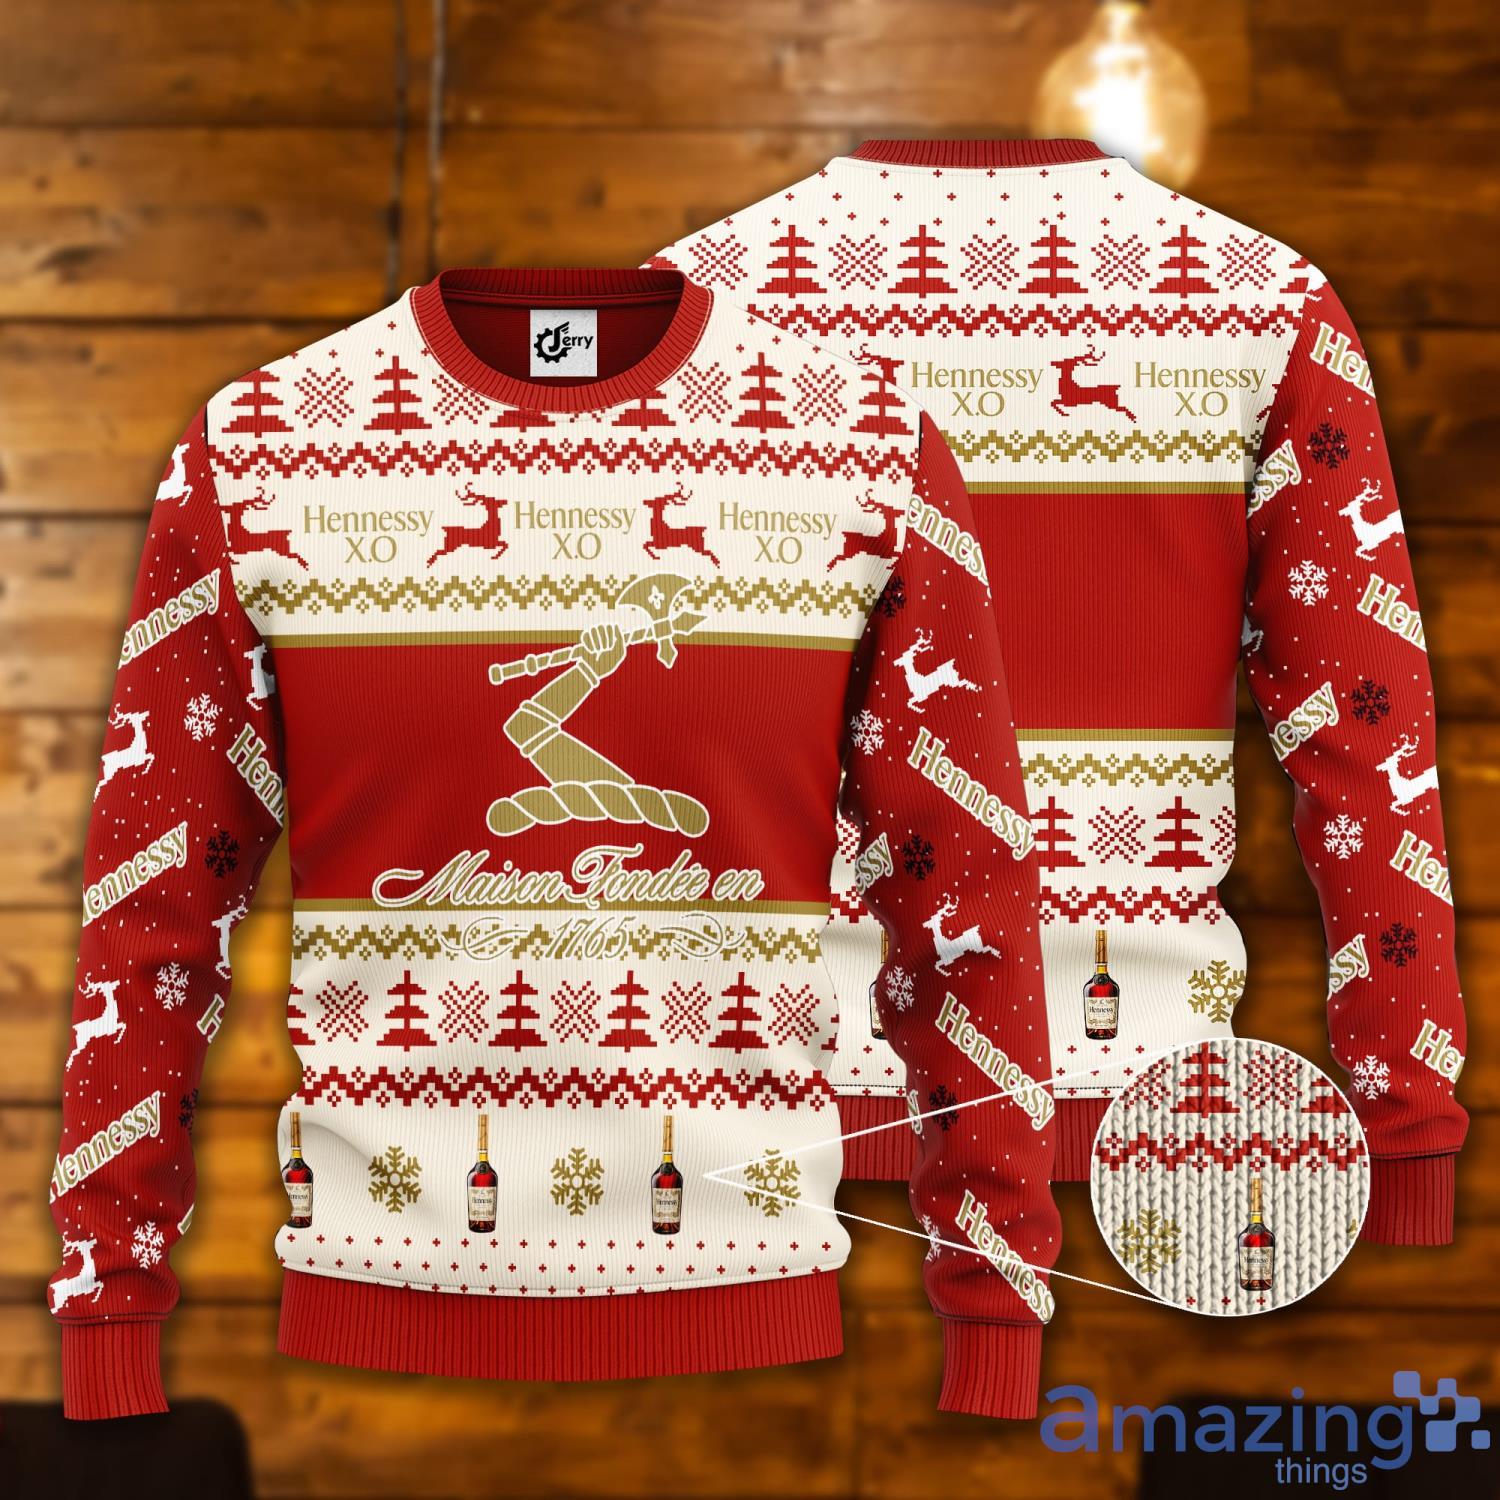 Hennessy Maison Fondee 1765 Ugly Christmas Sweater - LIMITED EDITION